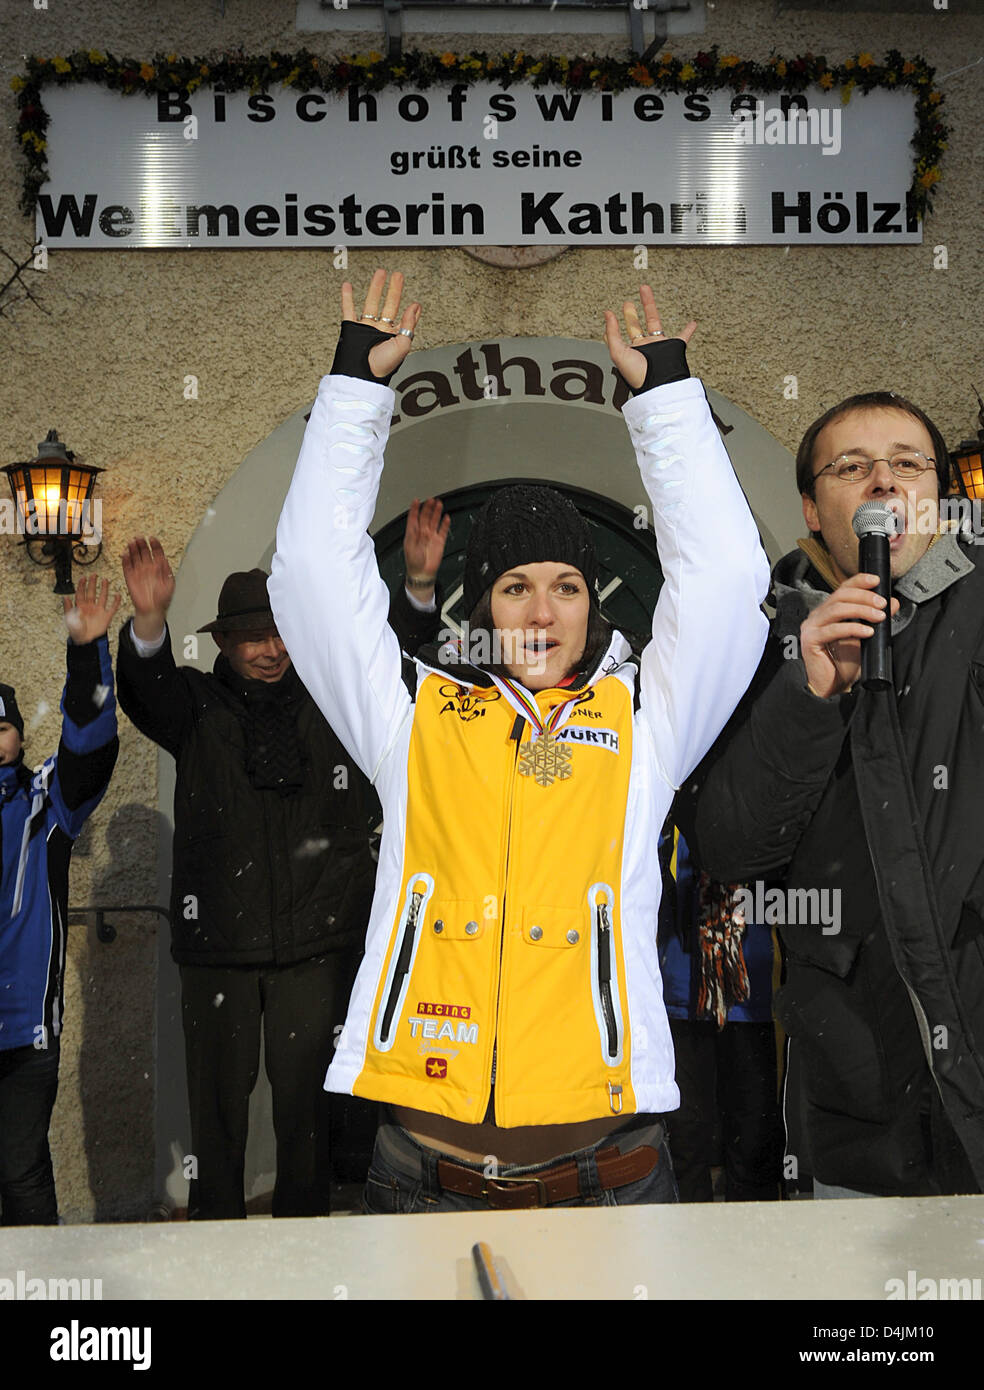 German skier Kathrin Hoelzl and sports commentator Gerhard Willmann cheer from the balcony of the town hall of Bischofswiesen, Germany, 16 February 2009. Hundreds of people gathered outside the town hall to celebrate Hoelzl who had won a Giant Slalom gold medal at the Alpine Skiing World Championships. Photo: Tobias Hase Stock Photo